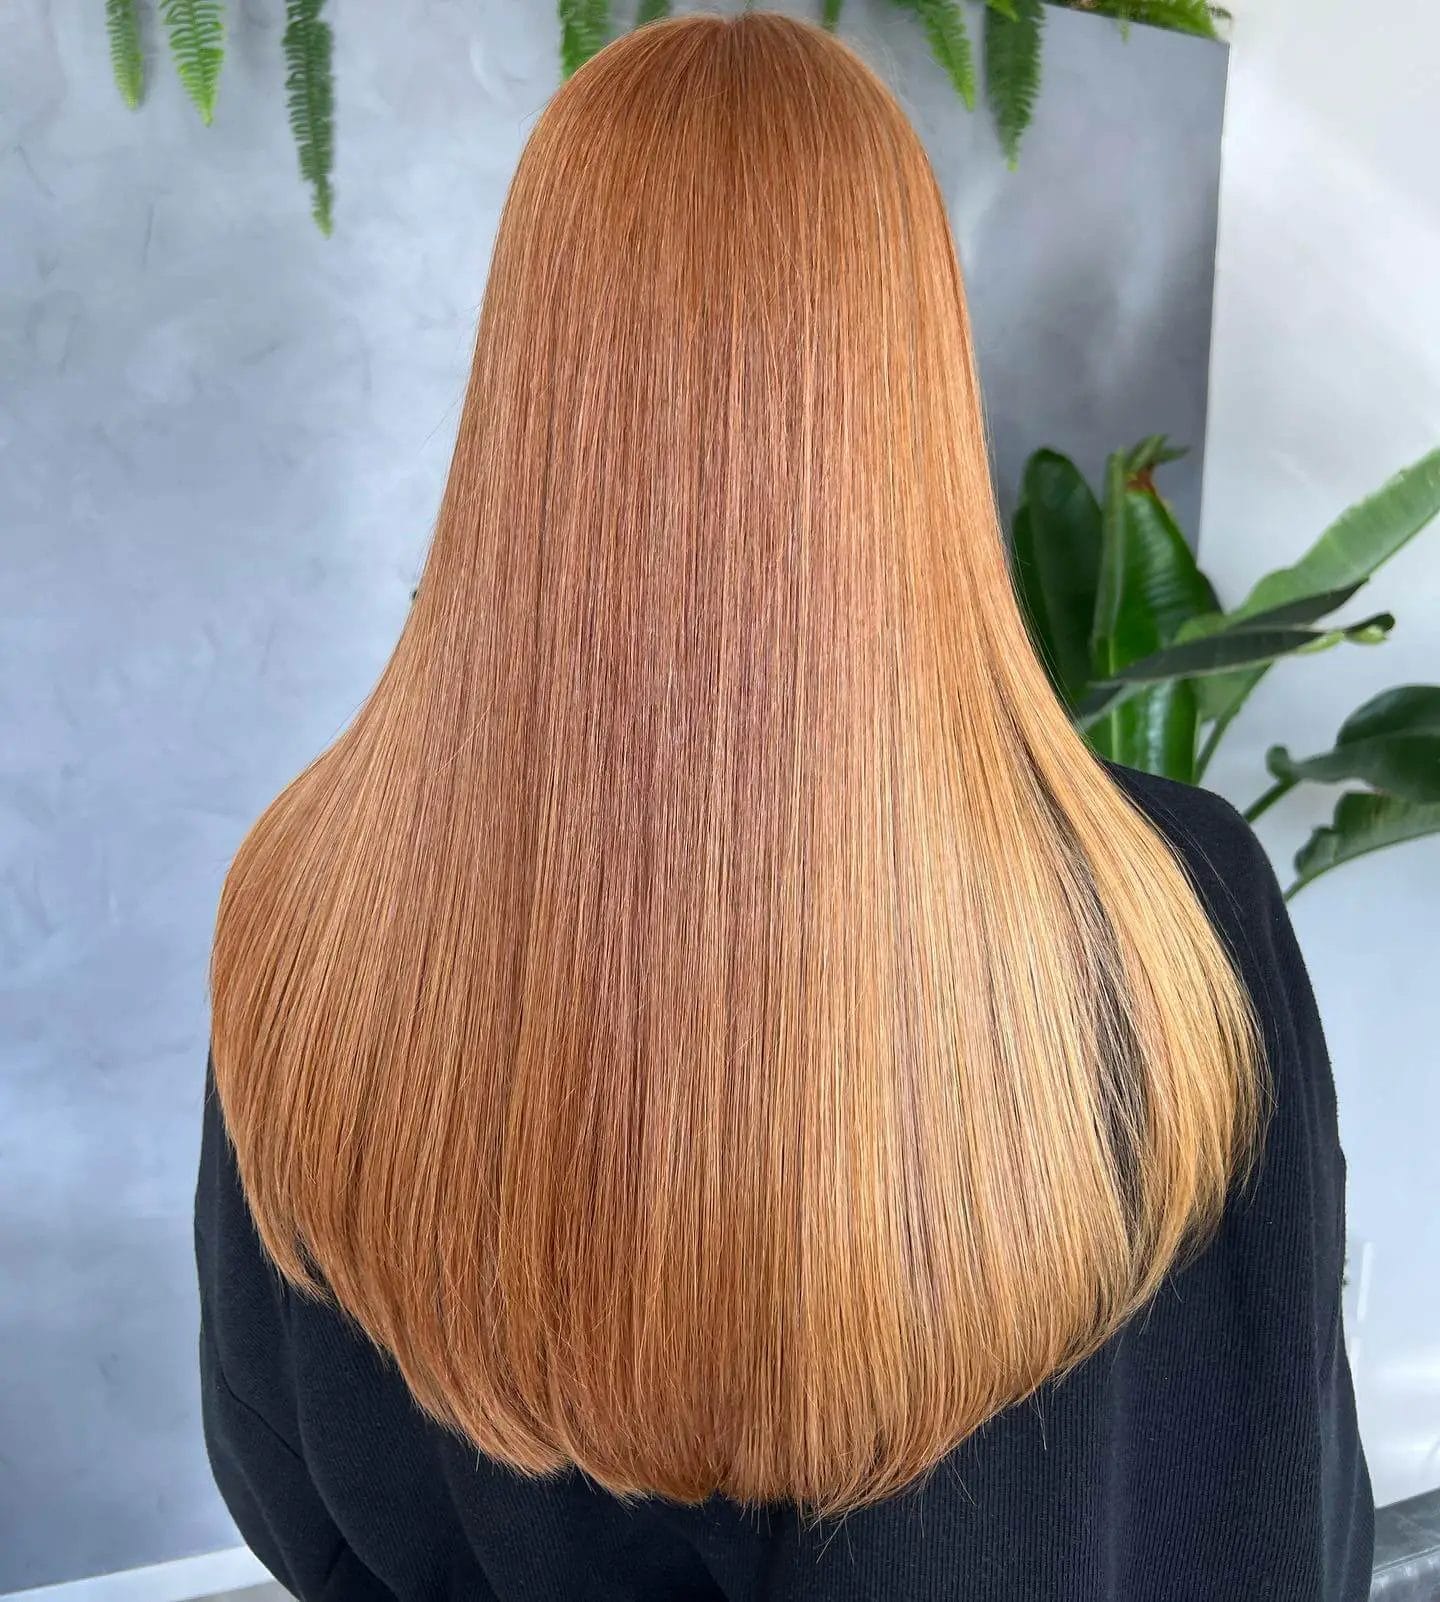 Amber radiant U-shaped haircut transitioning from copper roots to golden honey tips.
